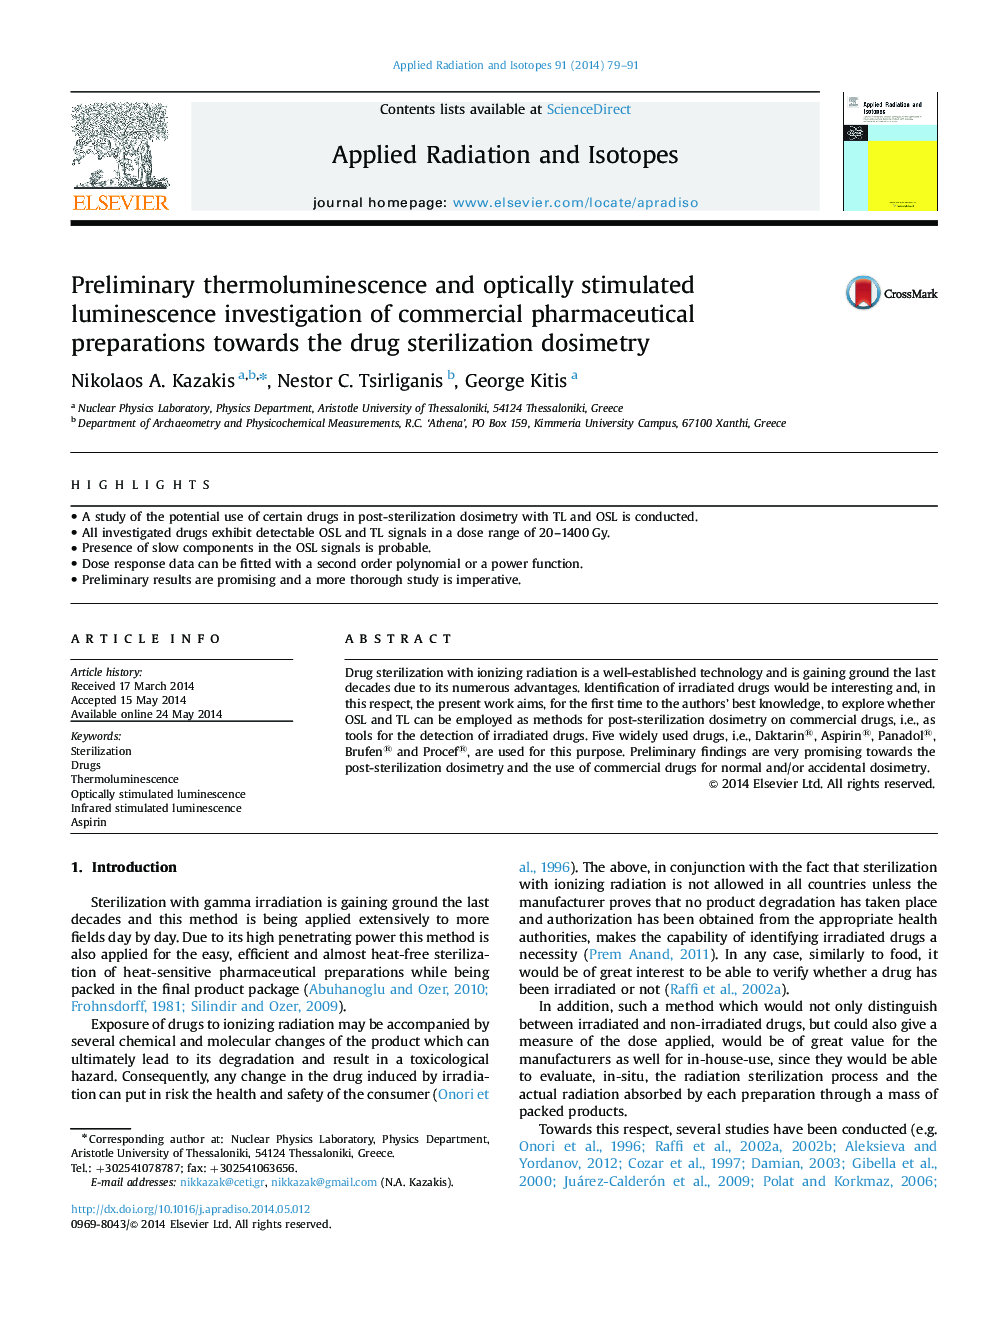 Preliminary thermoluminescence and optically stimulated luminescence investigation of commercial pharmaceutical preparations towards the drug sterilization dosimetry